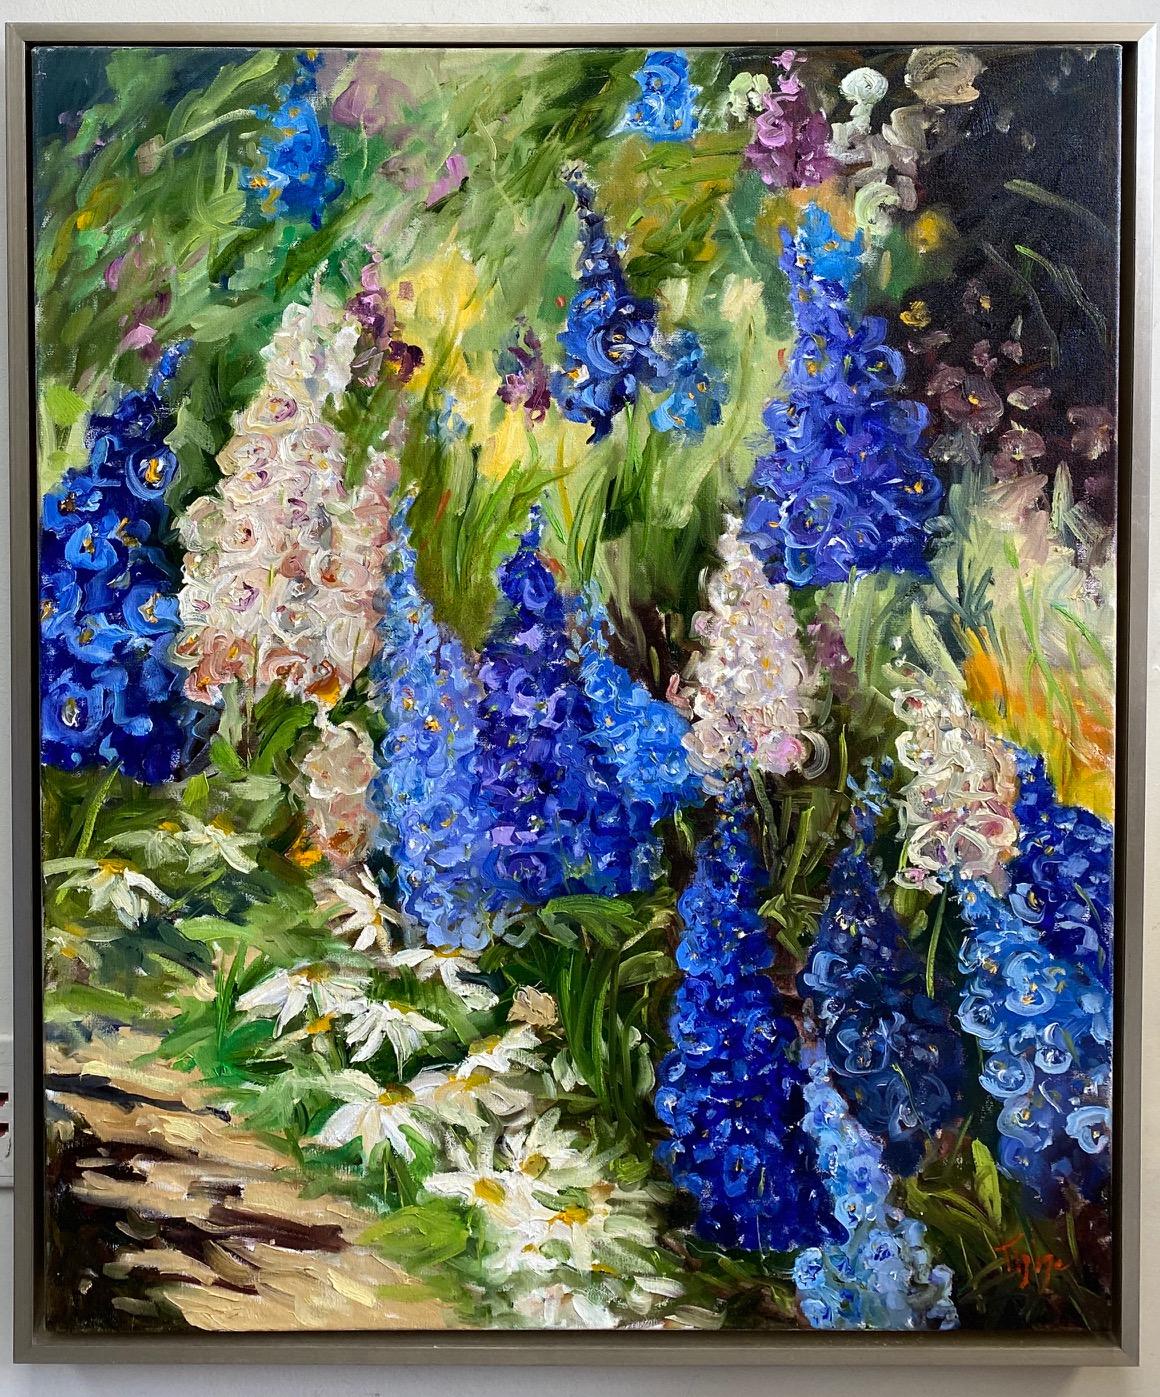 Doreen Tighe Landscape Painting - A Garden in Blue, 36x30 and Roses, original 24x30